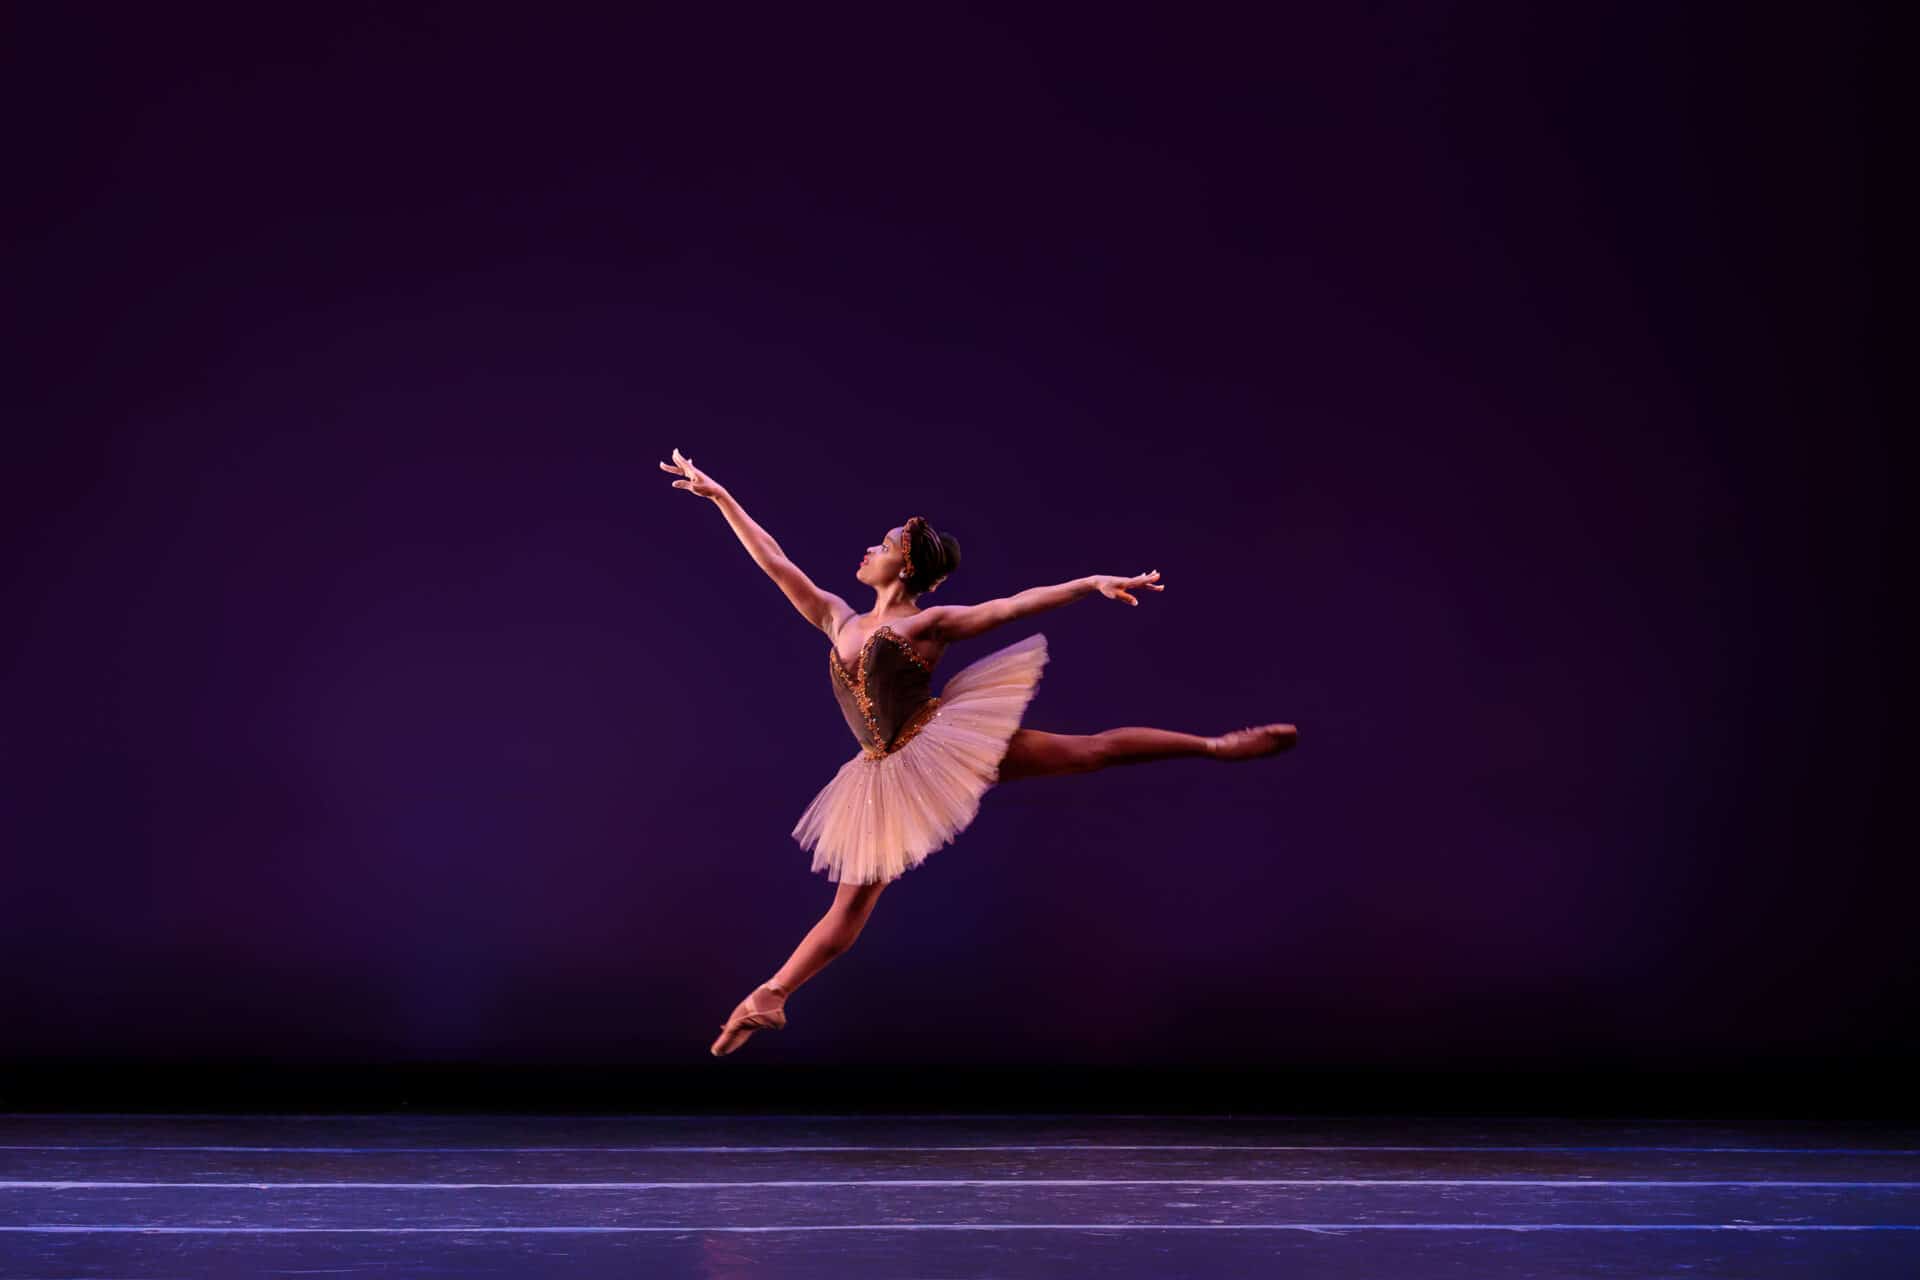 Ingrid Silva dances on stage and performs ballet. She dances in a pink tutu and dances in front of a purple backdrop.